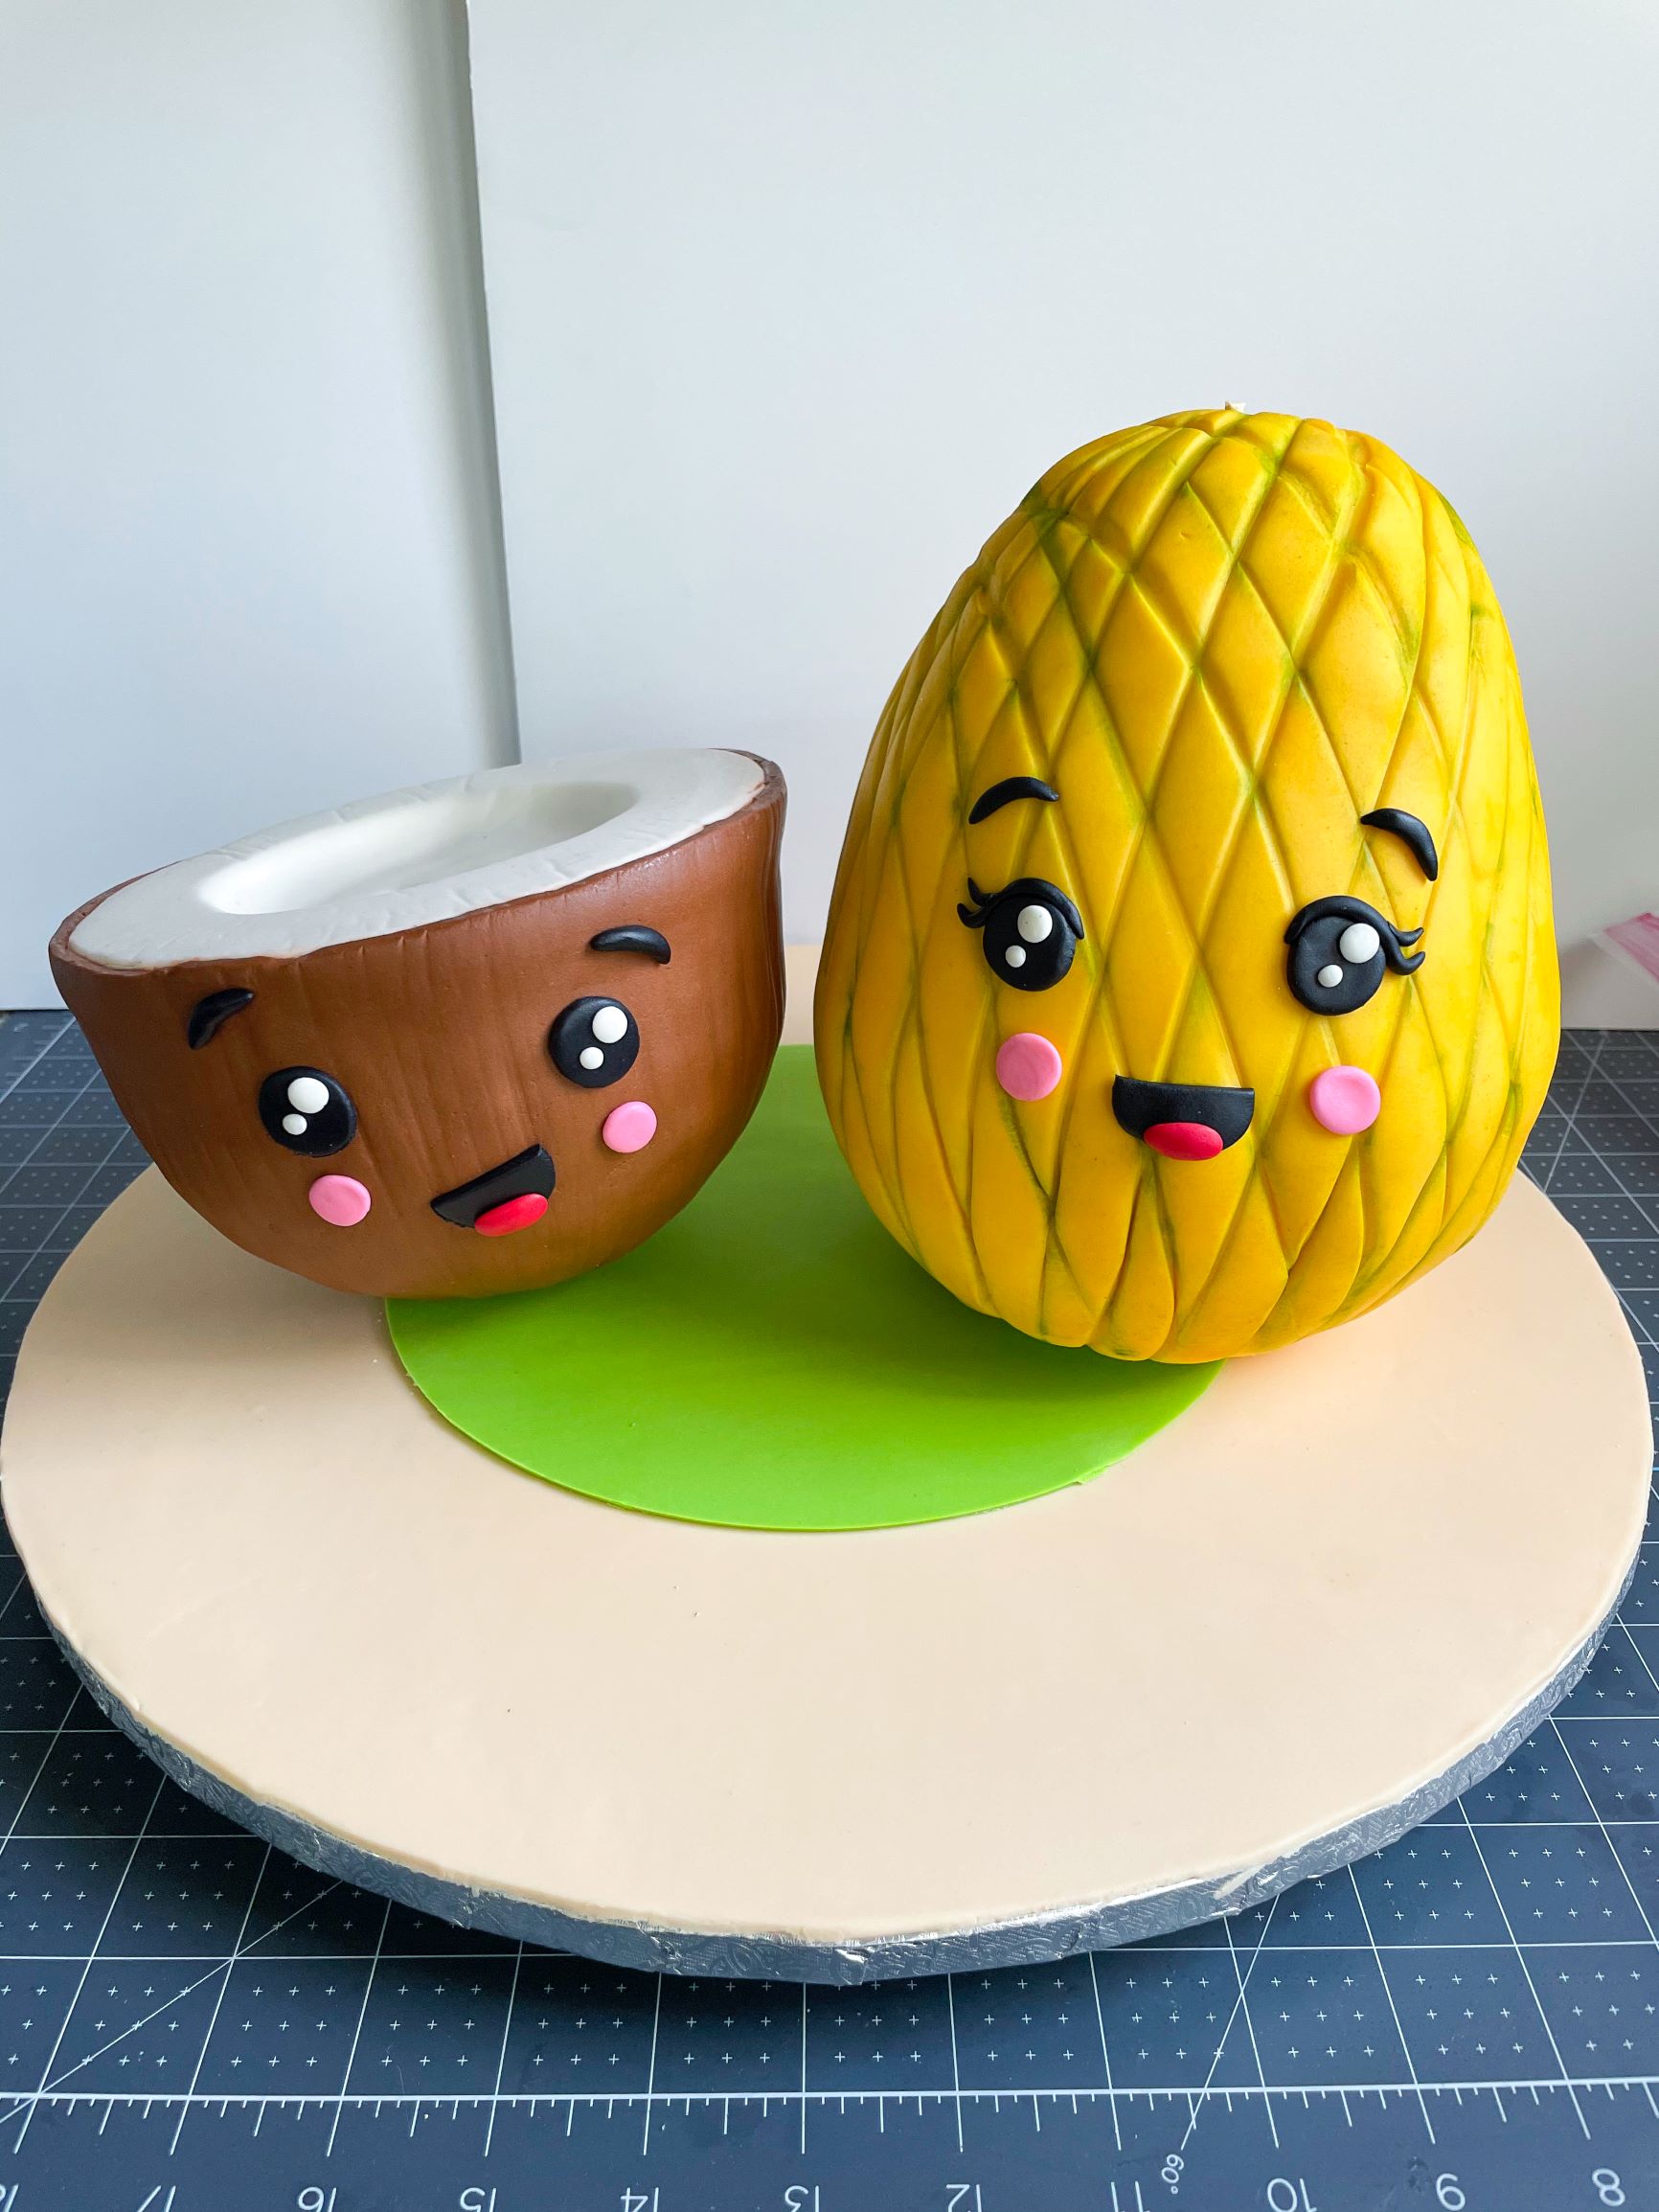 Make Some Fruity Friends from Cake!